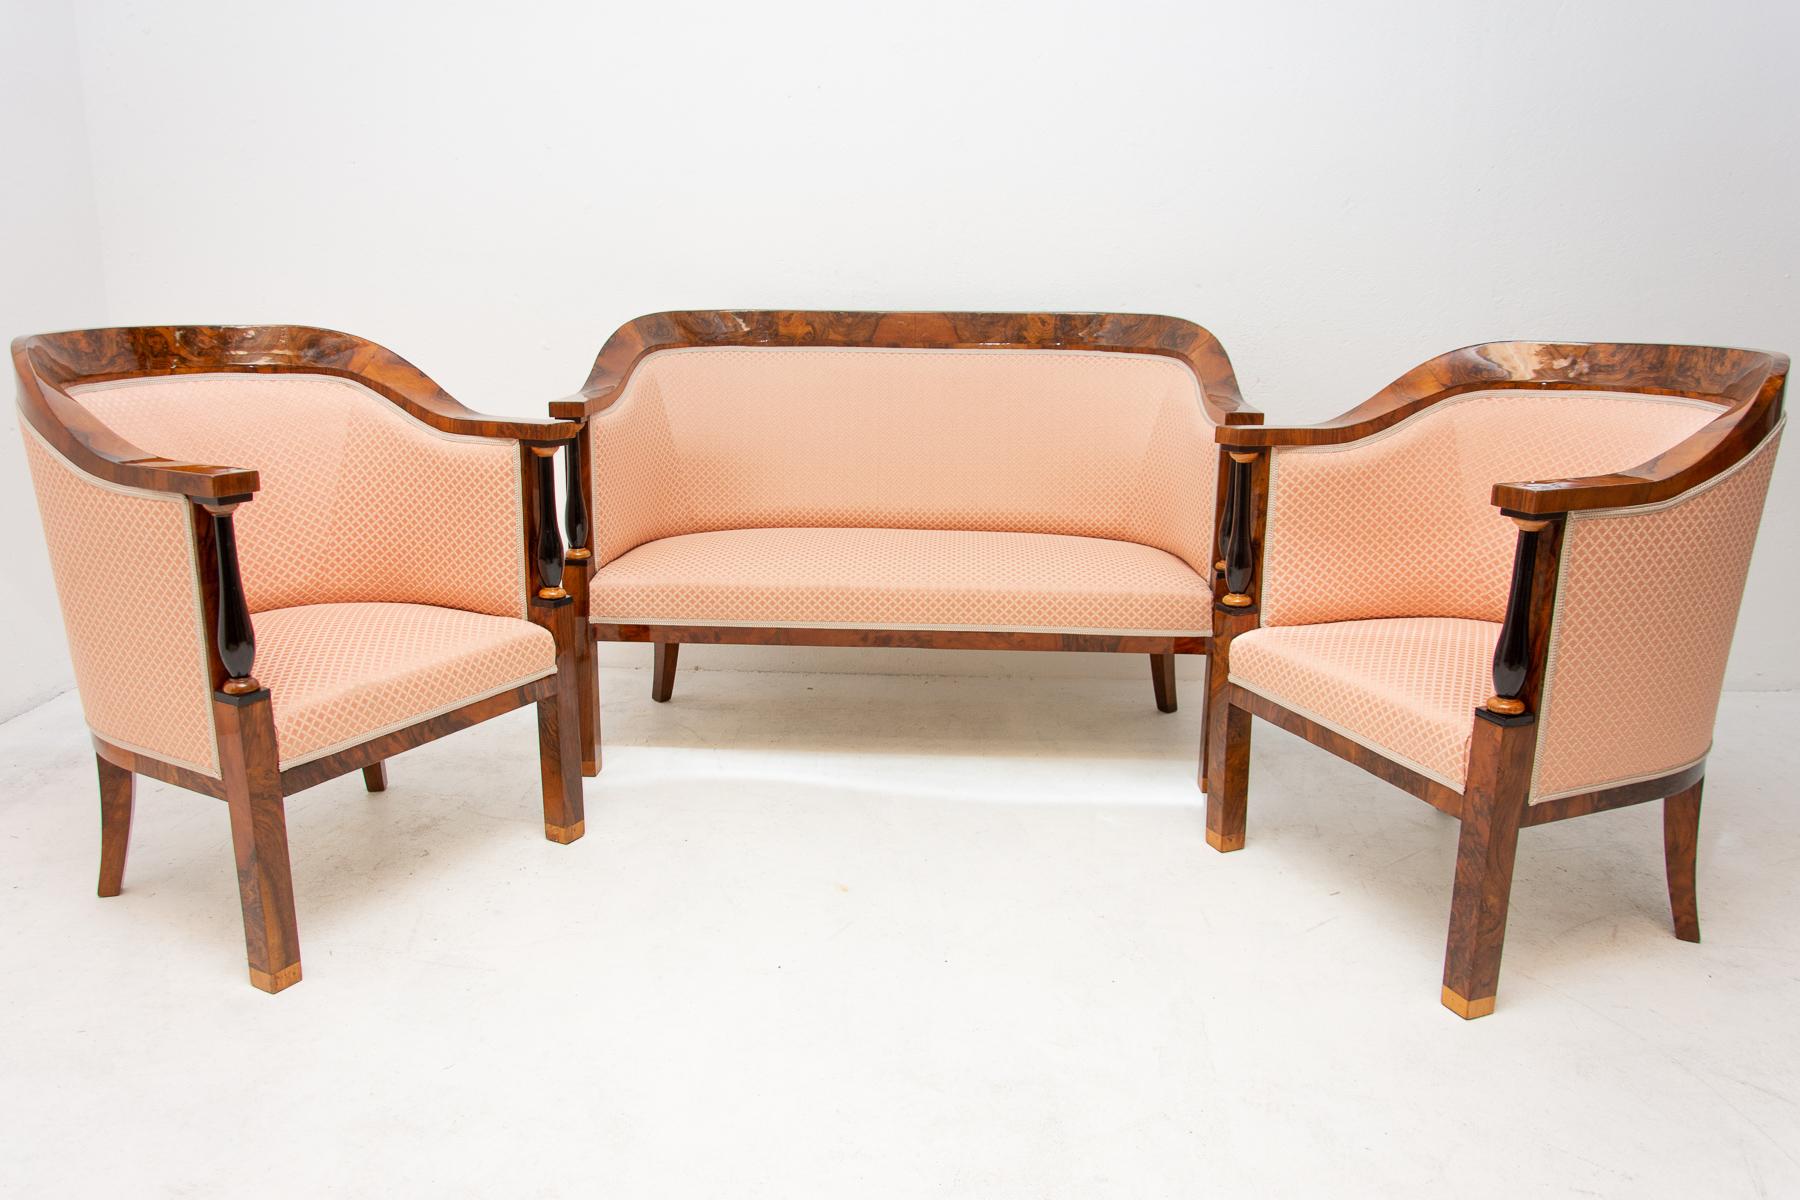 This seating group includes two armchairs and one sofa and it dates from the Biedermeier period. It was made circa 1830 in the former Austro-Hungarian Empire. The furniture is veneered with walnut veneer, new upholstery made in the original style.